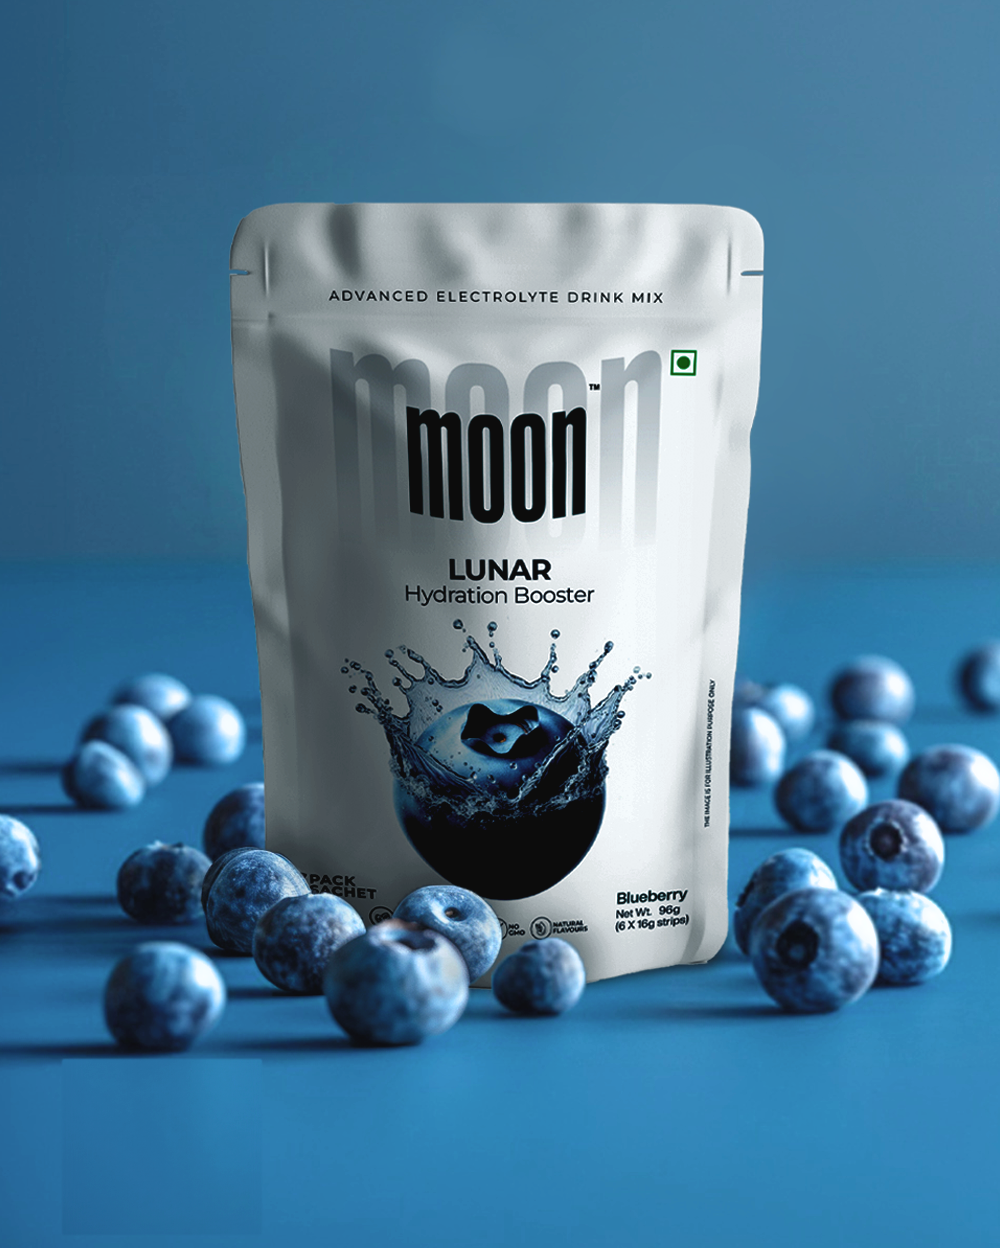 A package of Moon Blueberry Lunar Hydration Booster drink mix with blueberry flavor, surrounded by fresh blueberries, on a blue background, produced by MOONFREEZE FOODS PRIVATE LIMITED.